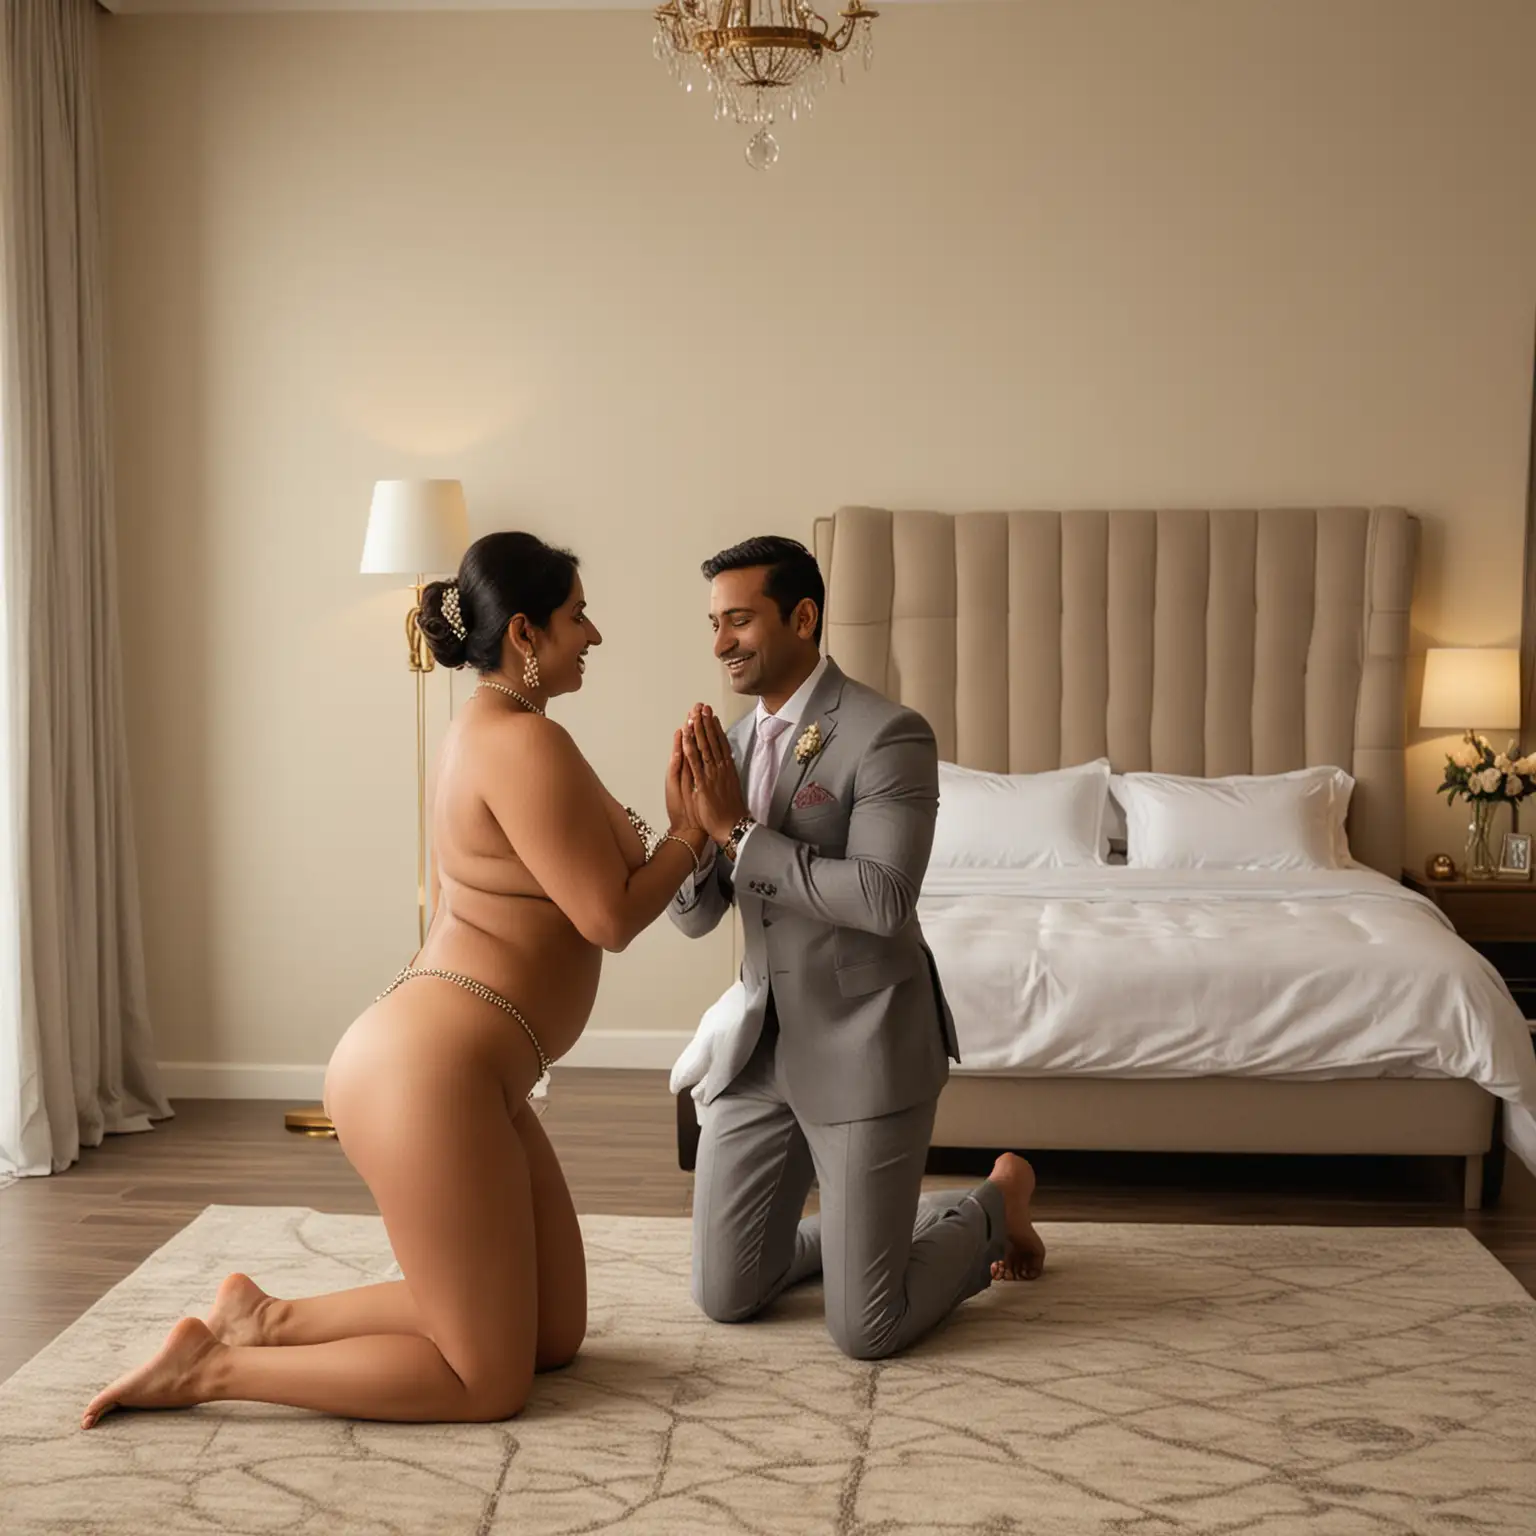 Generate full body image of a 40 year old very busty and curvy completly nude indian woman wearing jewellery kneeling down and doing namaste in front of her boyfriend  who is standing and proposing her wearing formal suit in a hotel bedroom